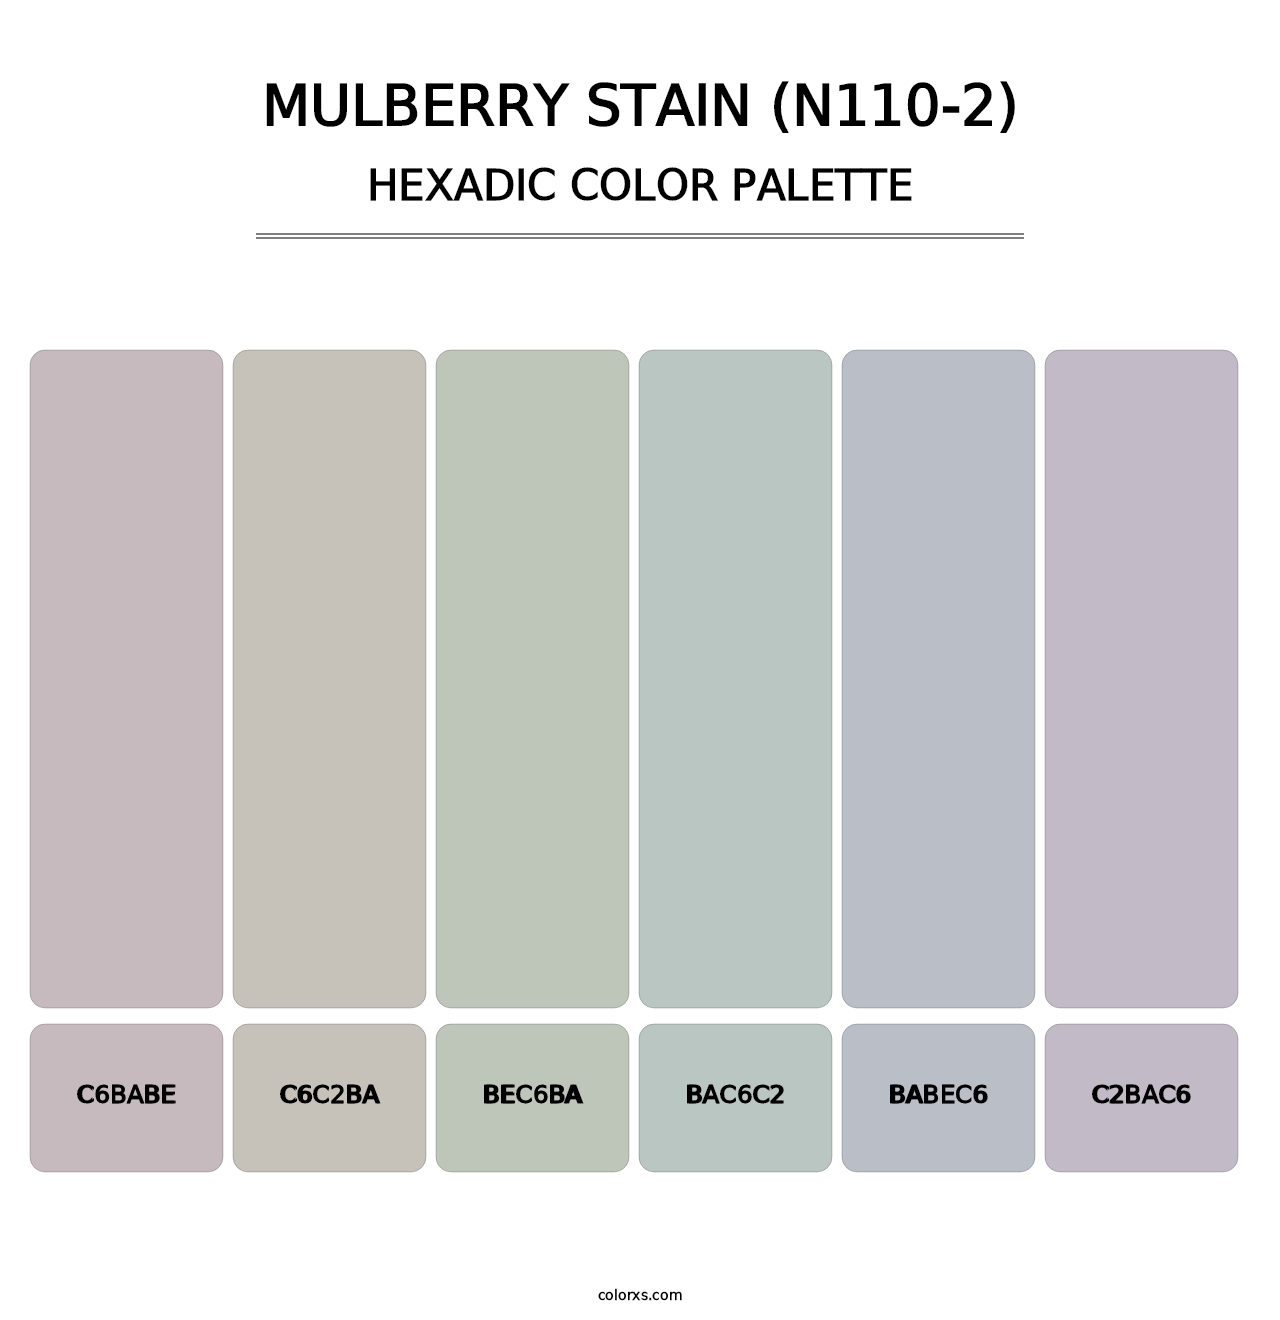 Mulberry Stain (N110-2) - Hexadic Color Palette